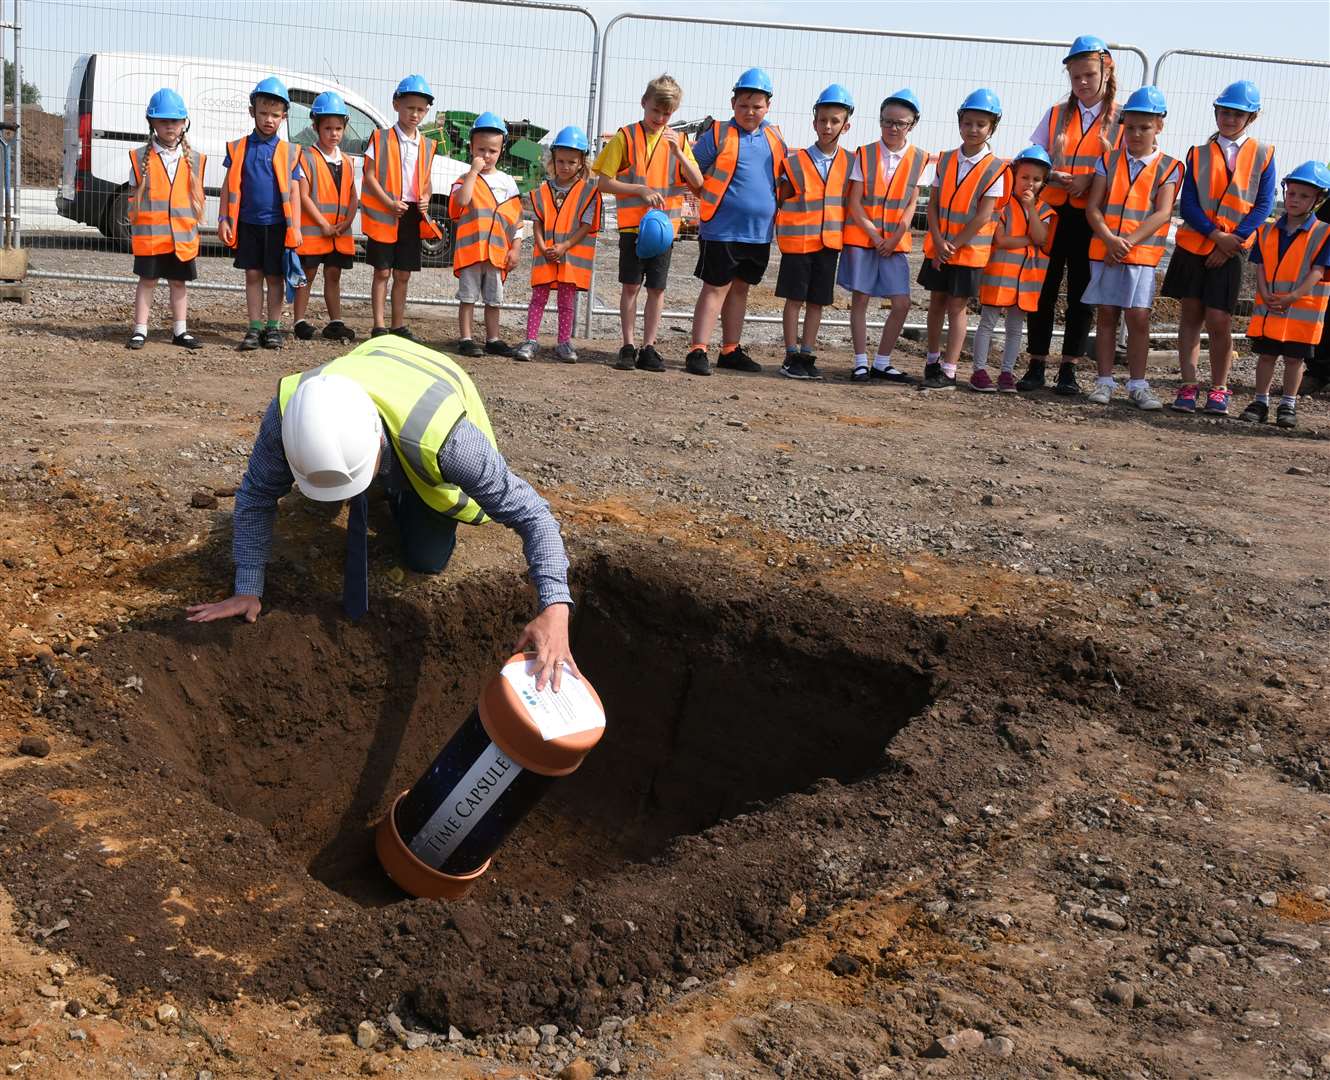 It's no good burying a time capsule if in 50 years no-one can remember where it is